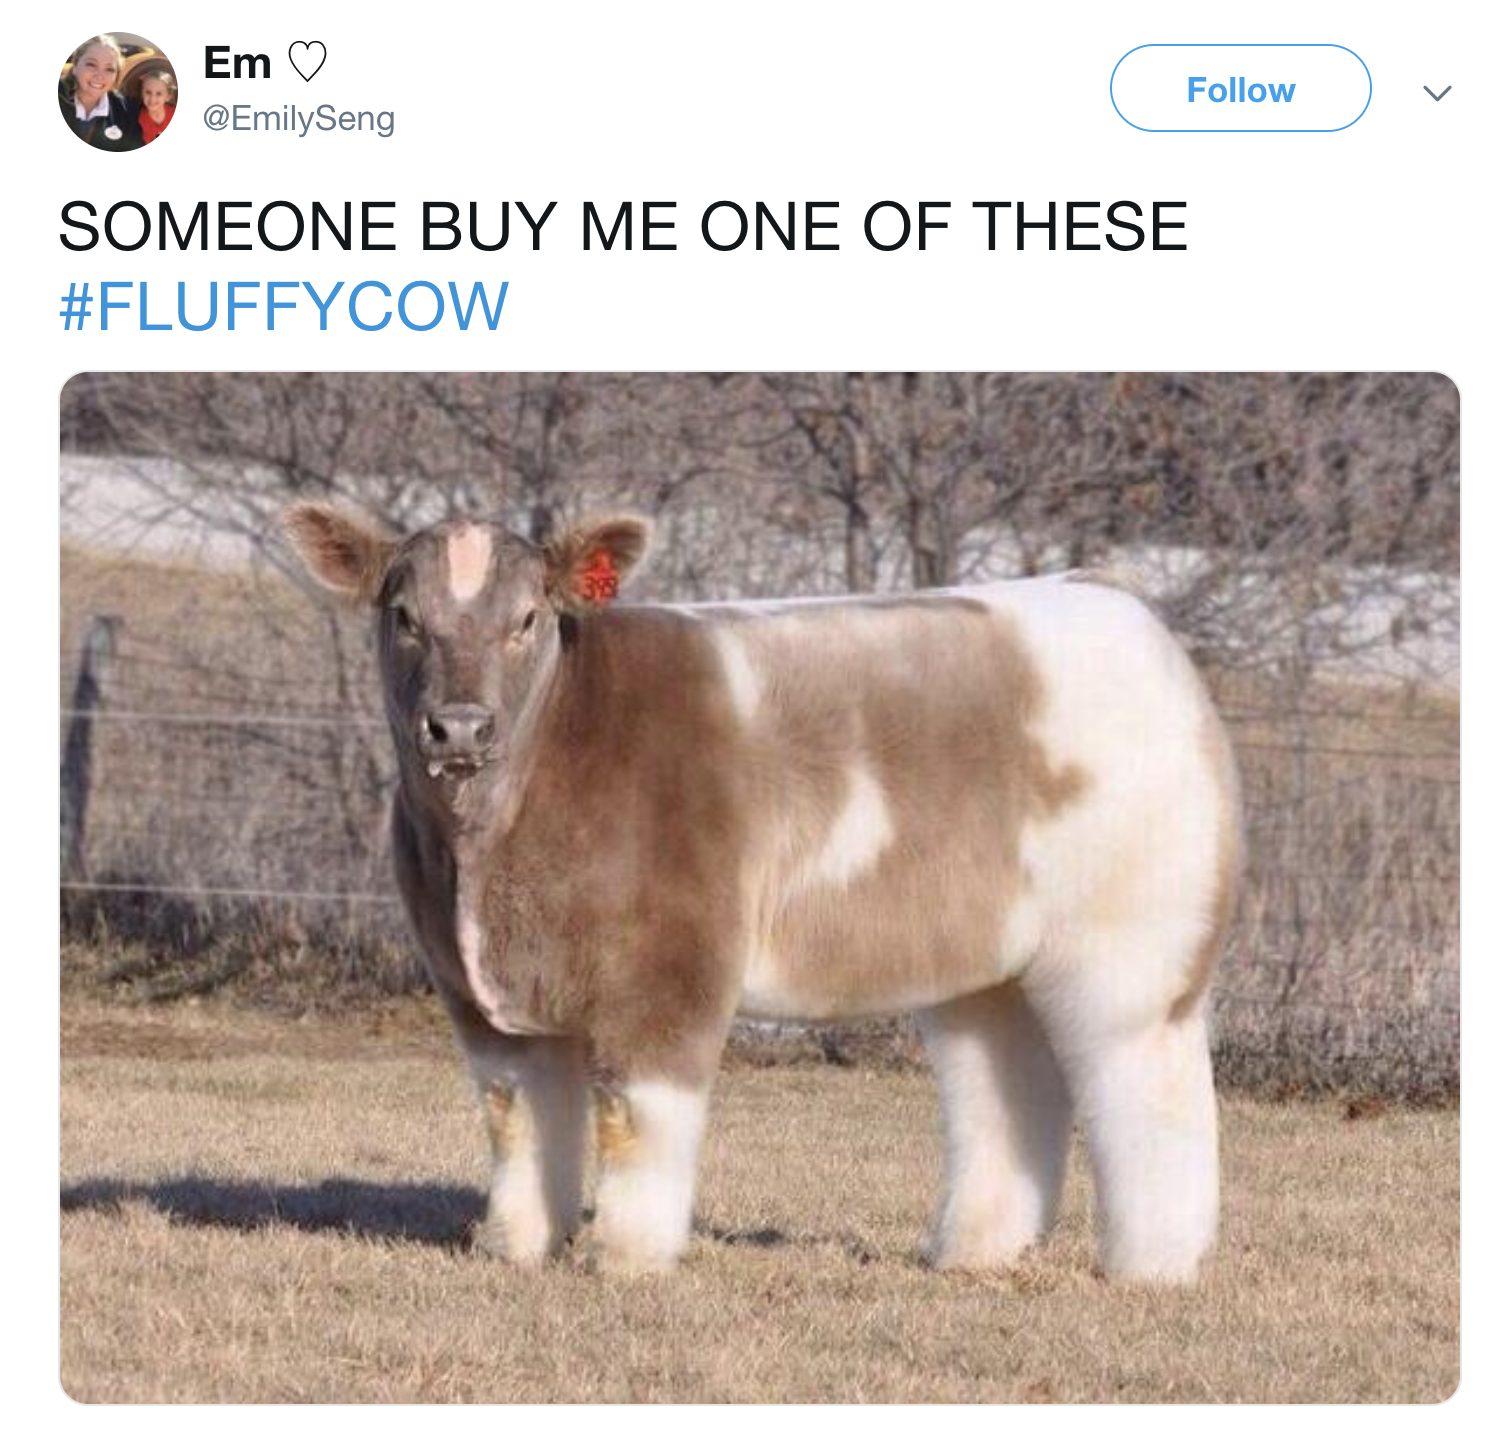 This Is What A Cow Looks Like When Its Blow Dried